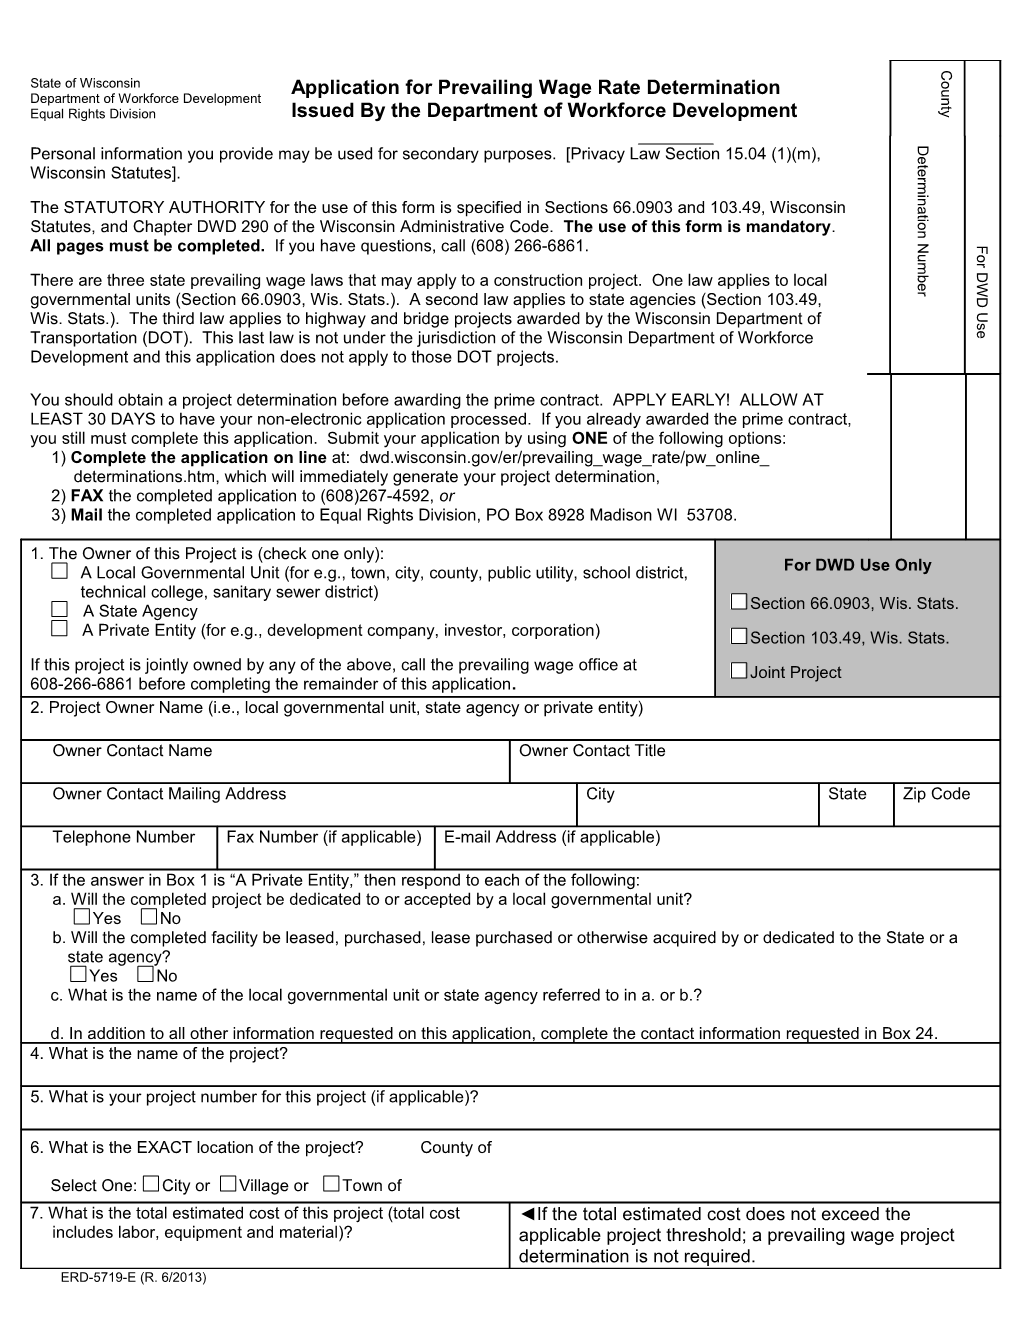 ERD-5719-E, Application for Prevailing Wage Rate Determination